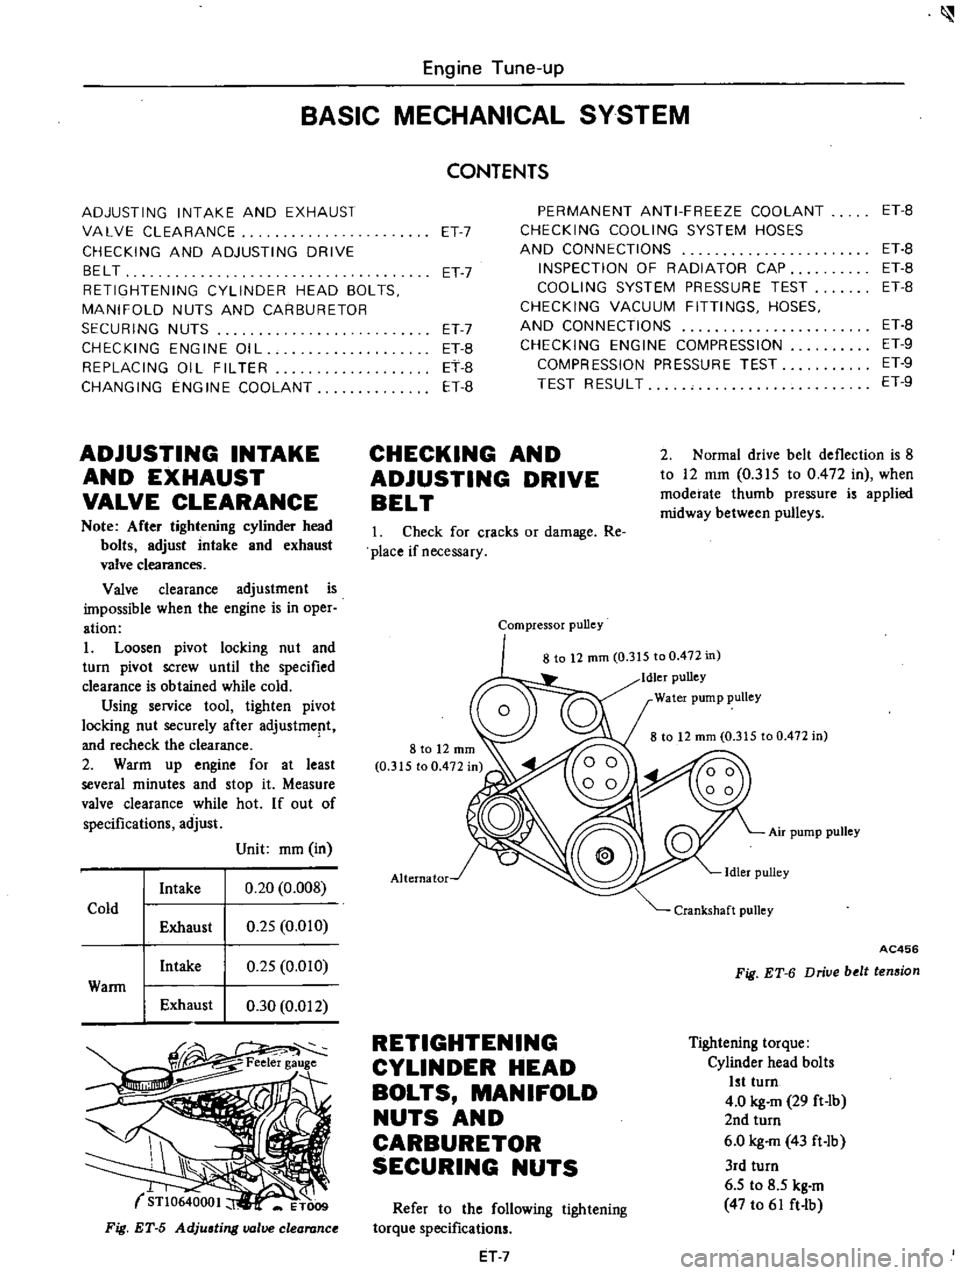 DATSUN PICK-UP 1977  Service Manual 
Engine 
Tune

up

BASIC 
MECHANICAL 
SYSTEM

ADJUSTING 
INTAKE 
AND 
EXHAUST

VALVE 
CLEARANCE

CHECKING 
AND

ADJUSTING 
DRIVE

BELT

RETIGHTENING 
CYLINDER 
HEAD 
BOLTS

MANIFOLD 
NUTS 
AND 
CARBUR